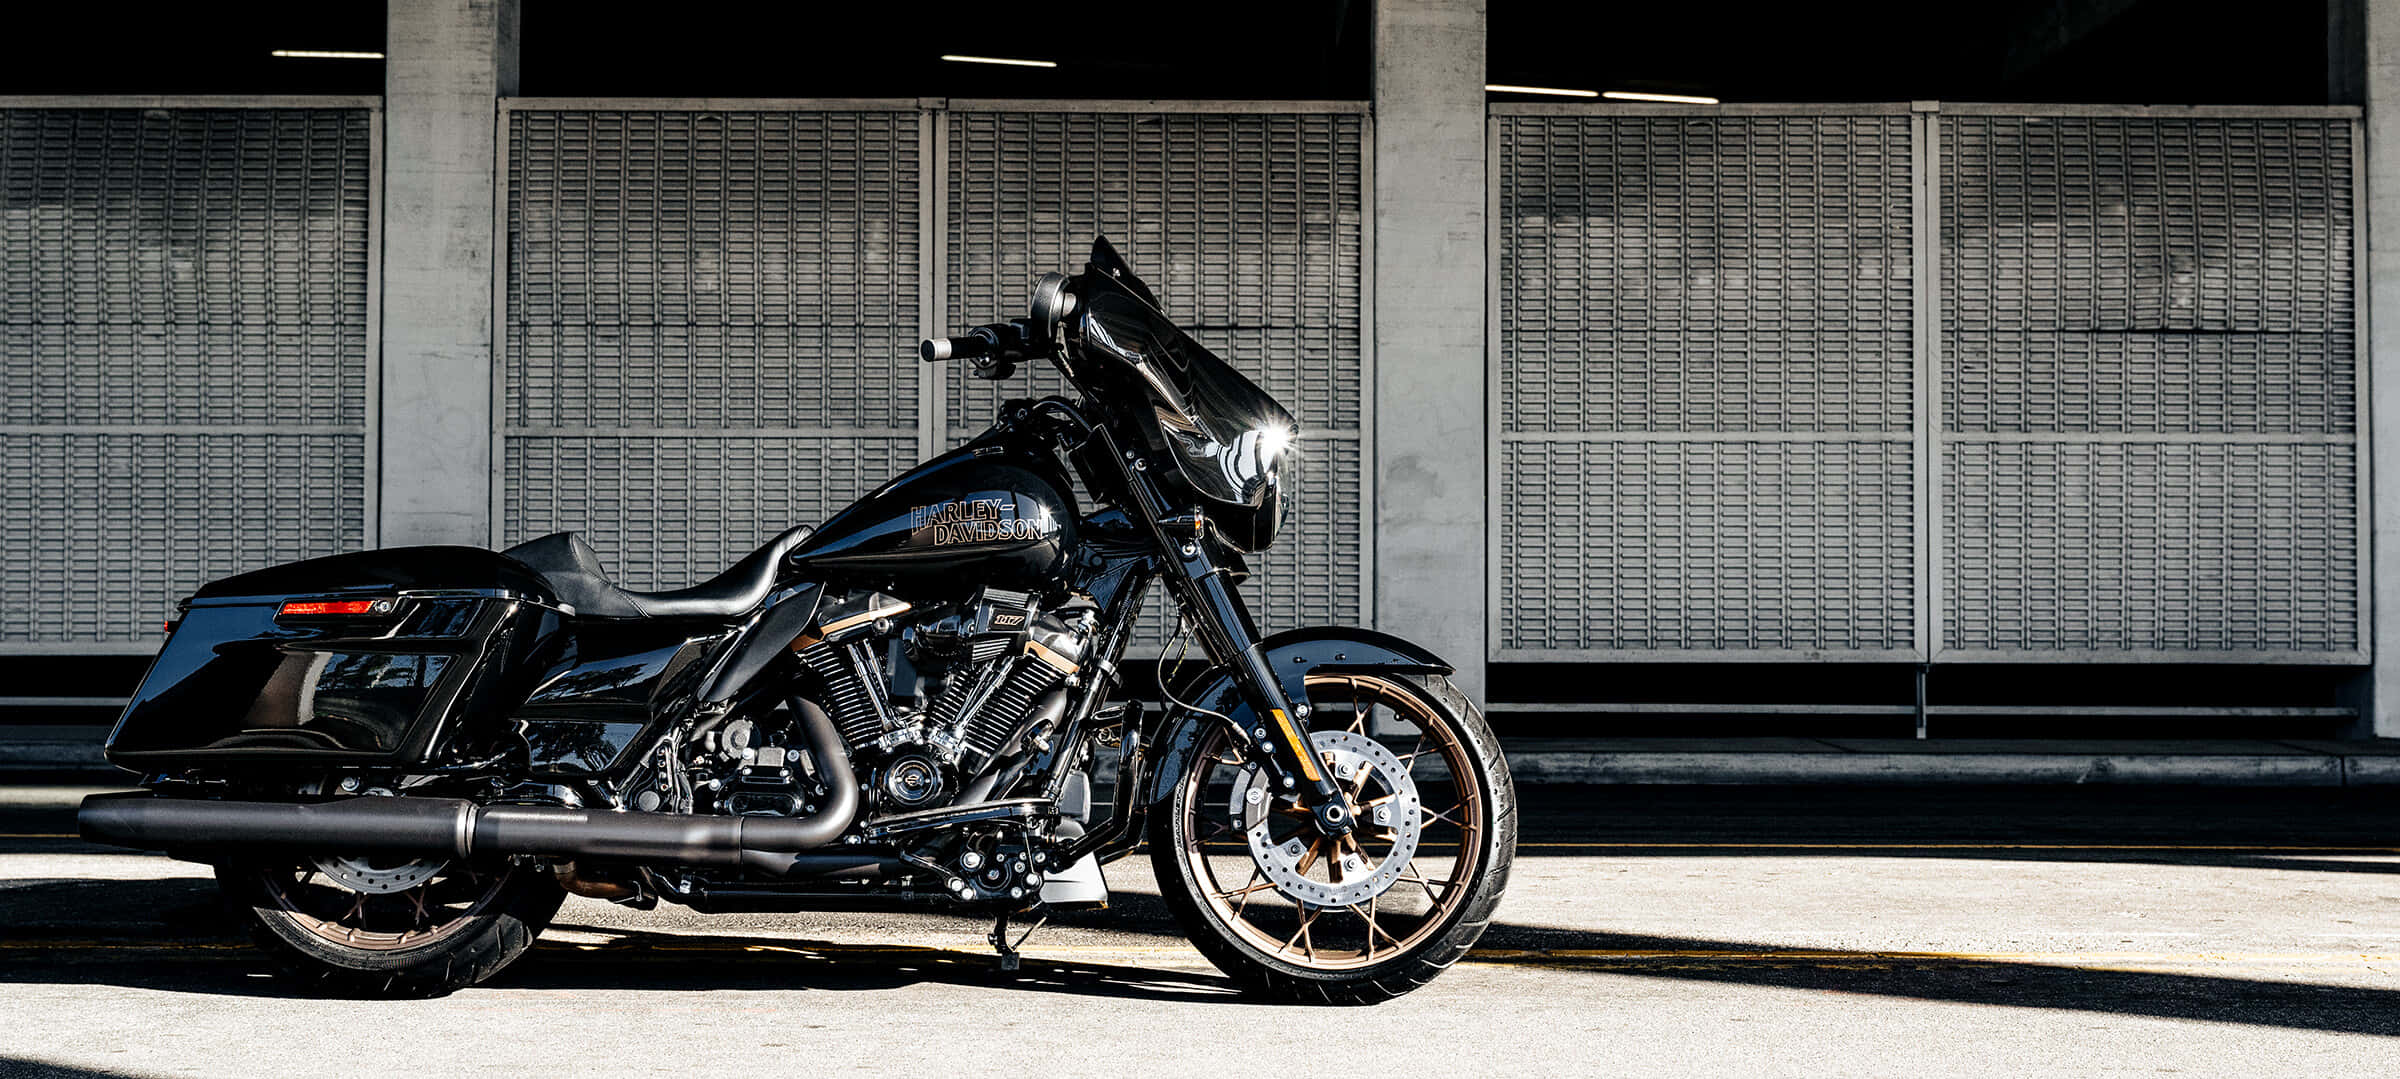 Enjoy the open road with a Harley-Davidson motorcycle